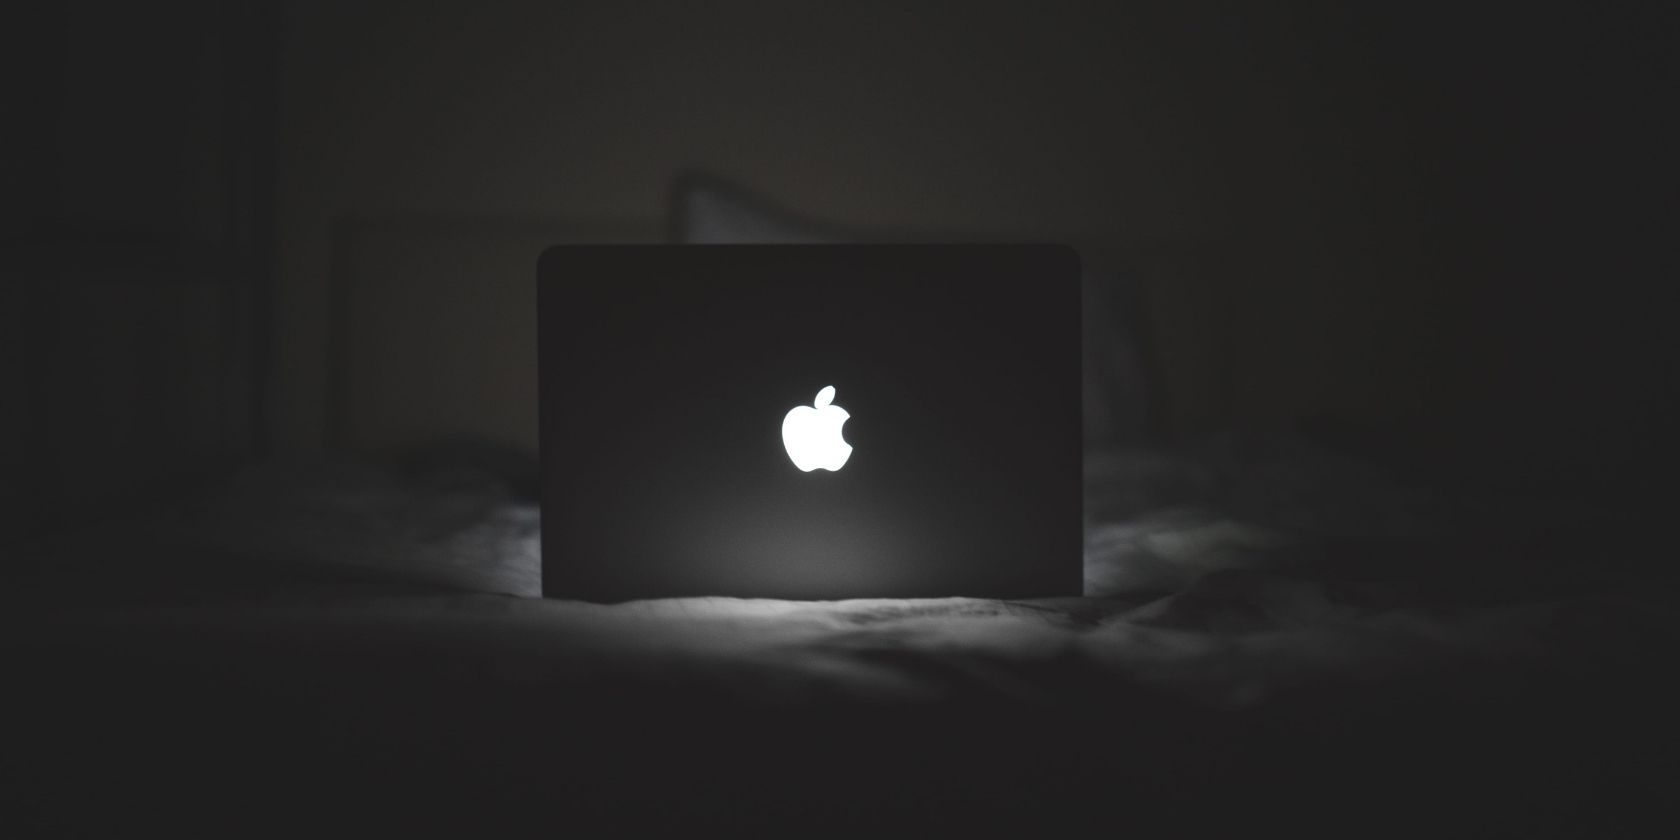 MacBook with a lit Apple logo.